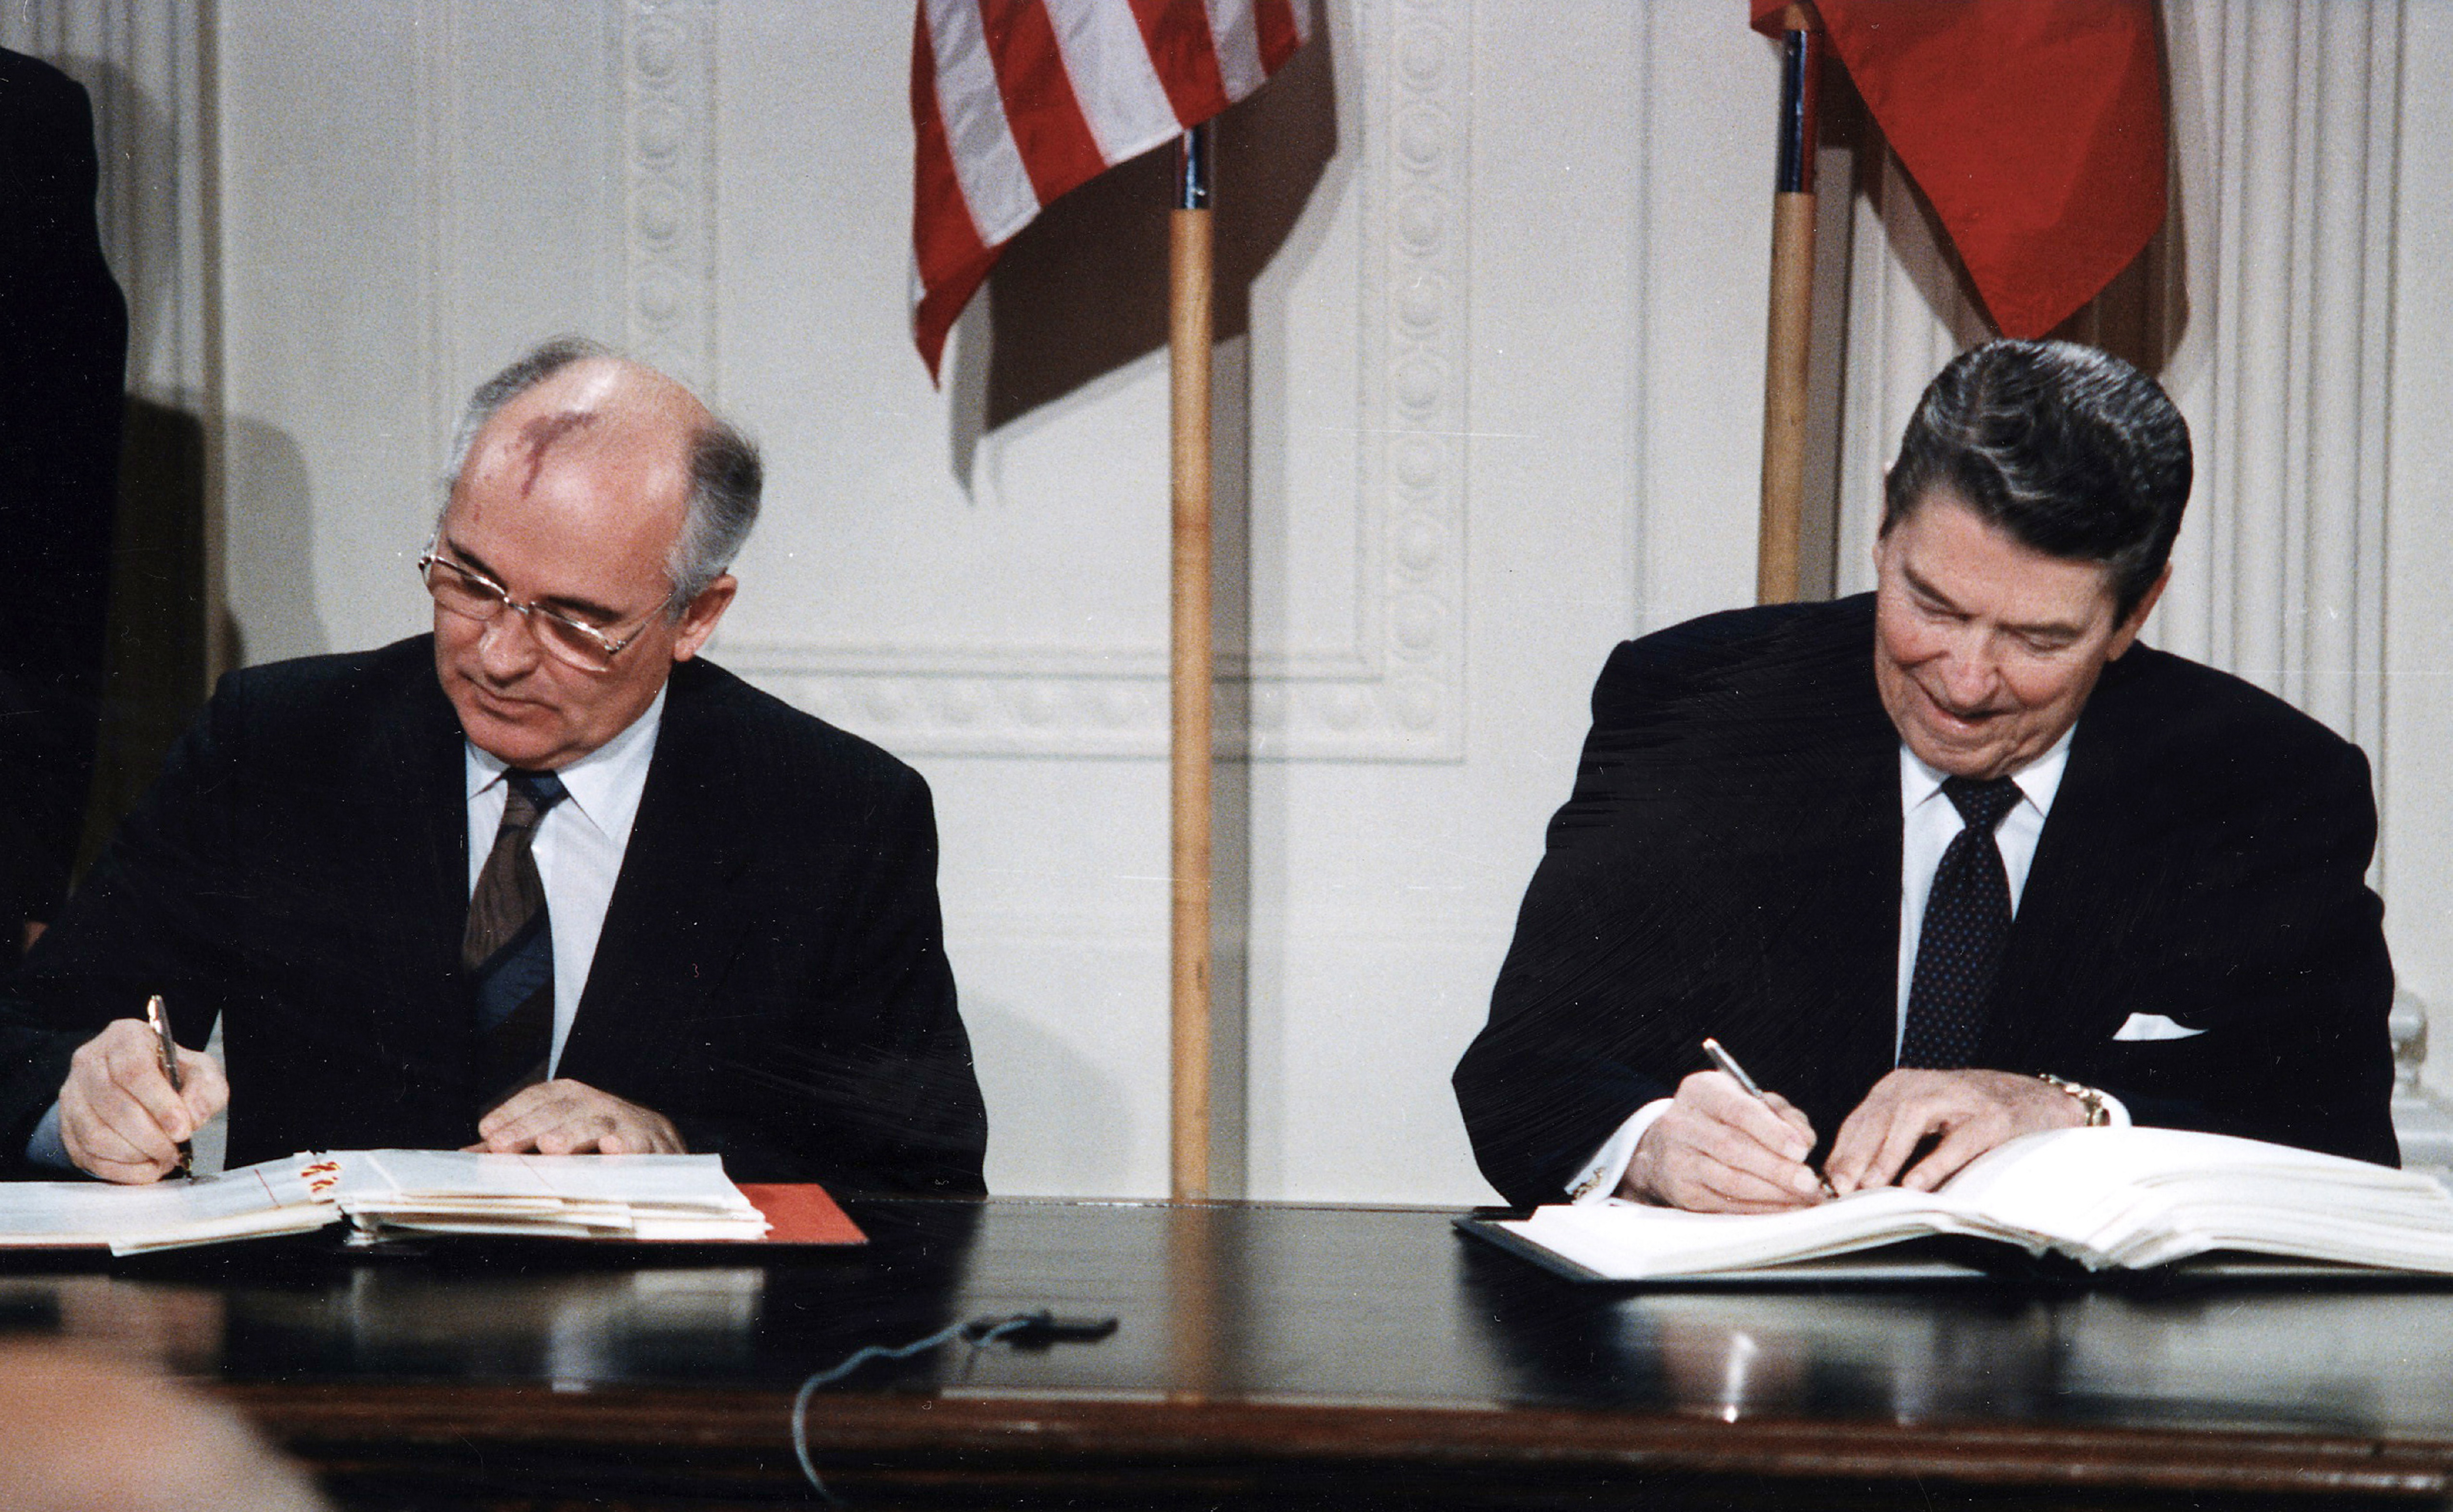 Mikhail Gorbachev and Ronald Reagan sit behind a dark wooden desk in the East Room of the White House, signing the Intermediate-Range Nuclear Forces Treaty.